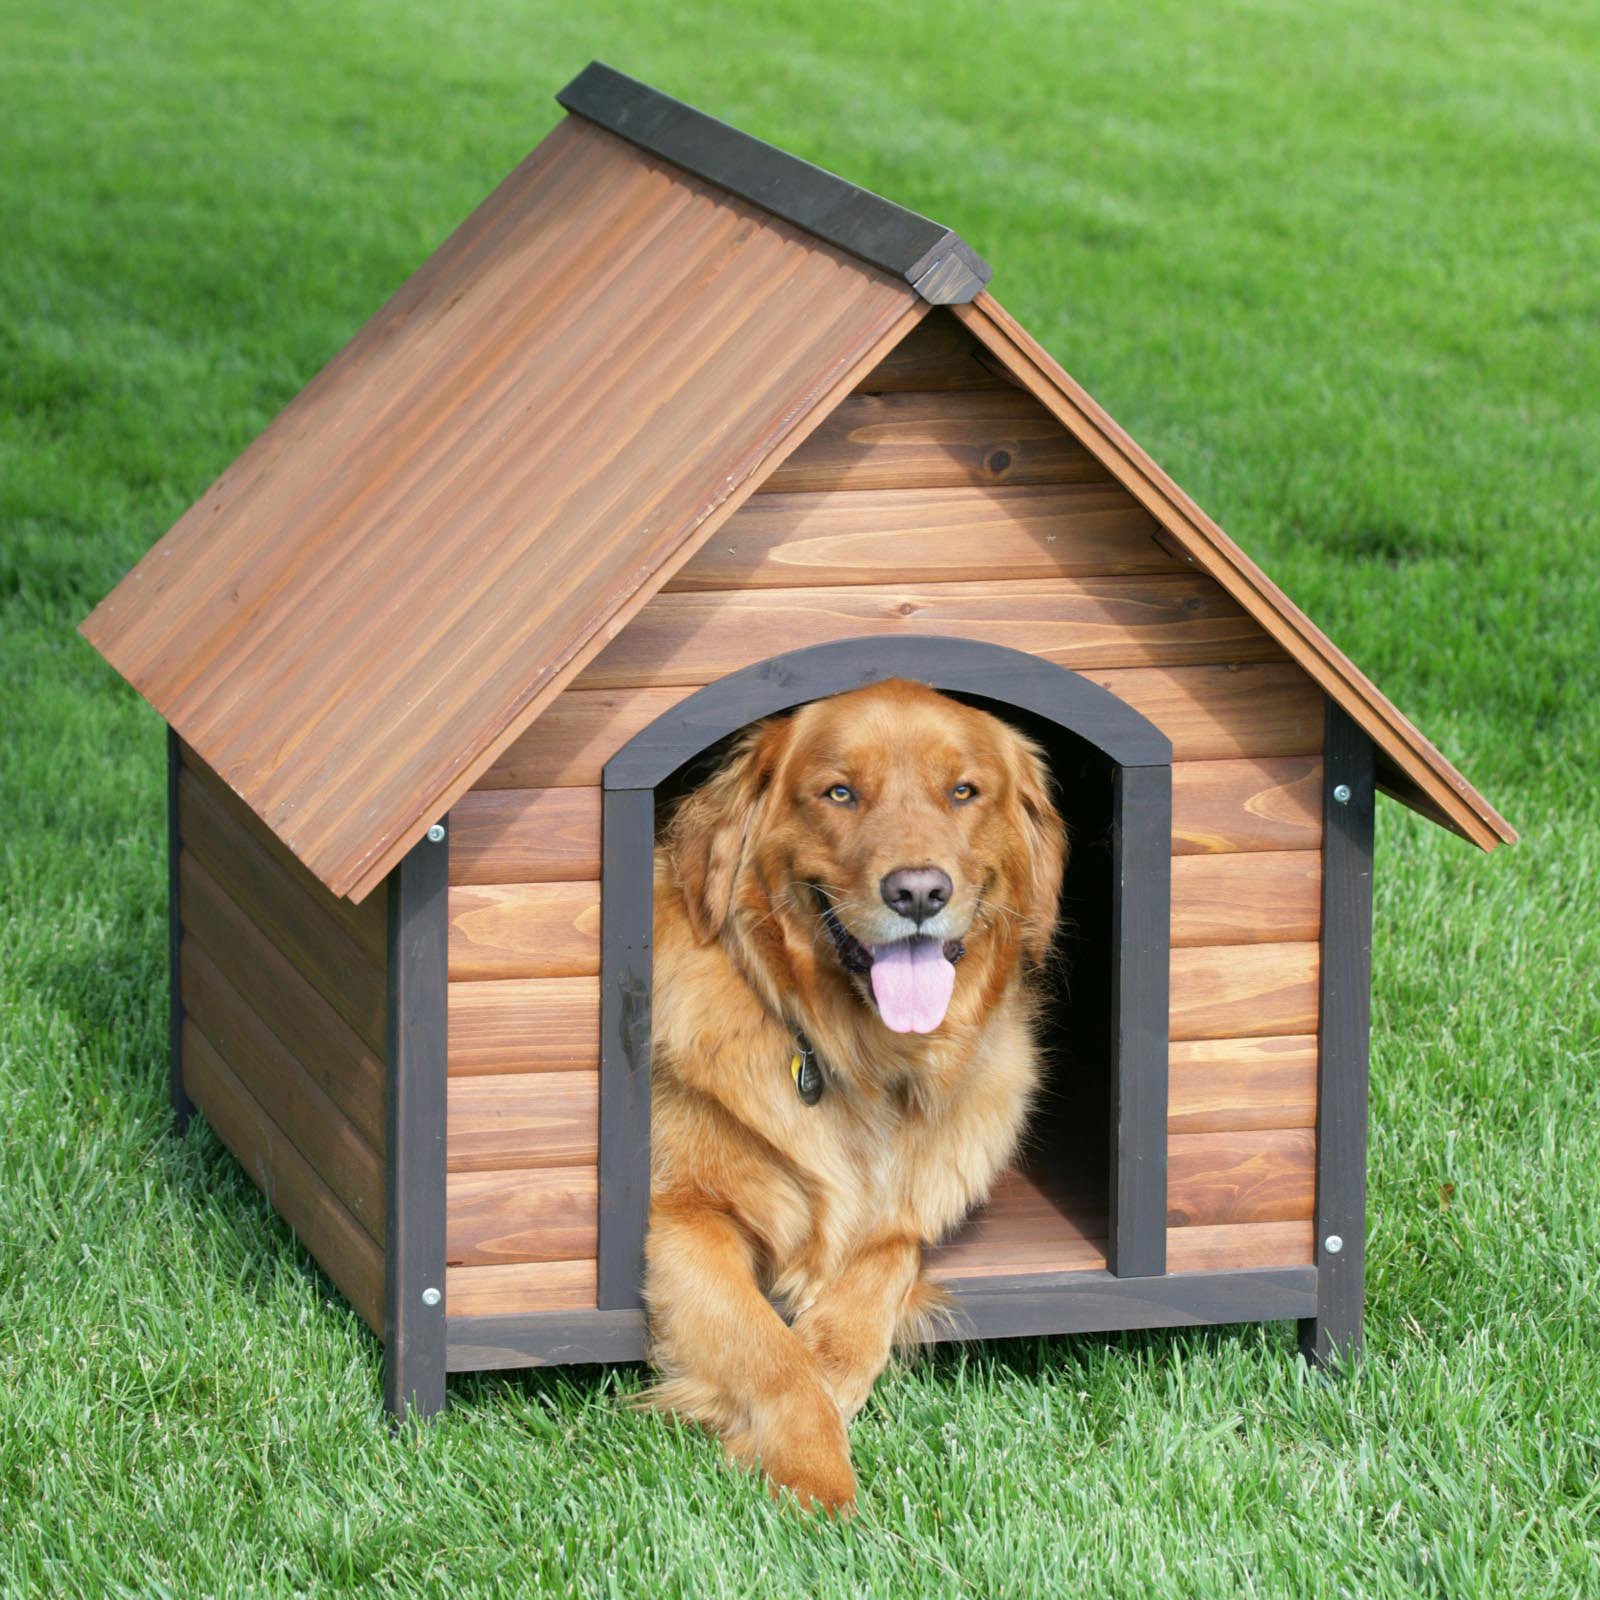  By Step Instruction On How To Build A Dog House [VIDEO] « eZeLiving